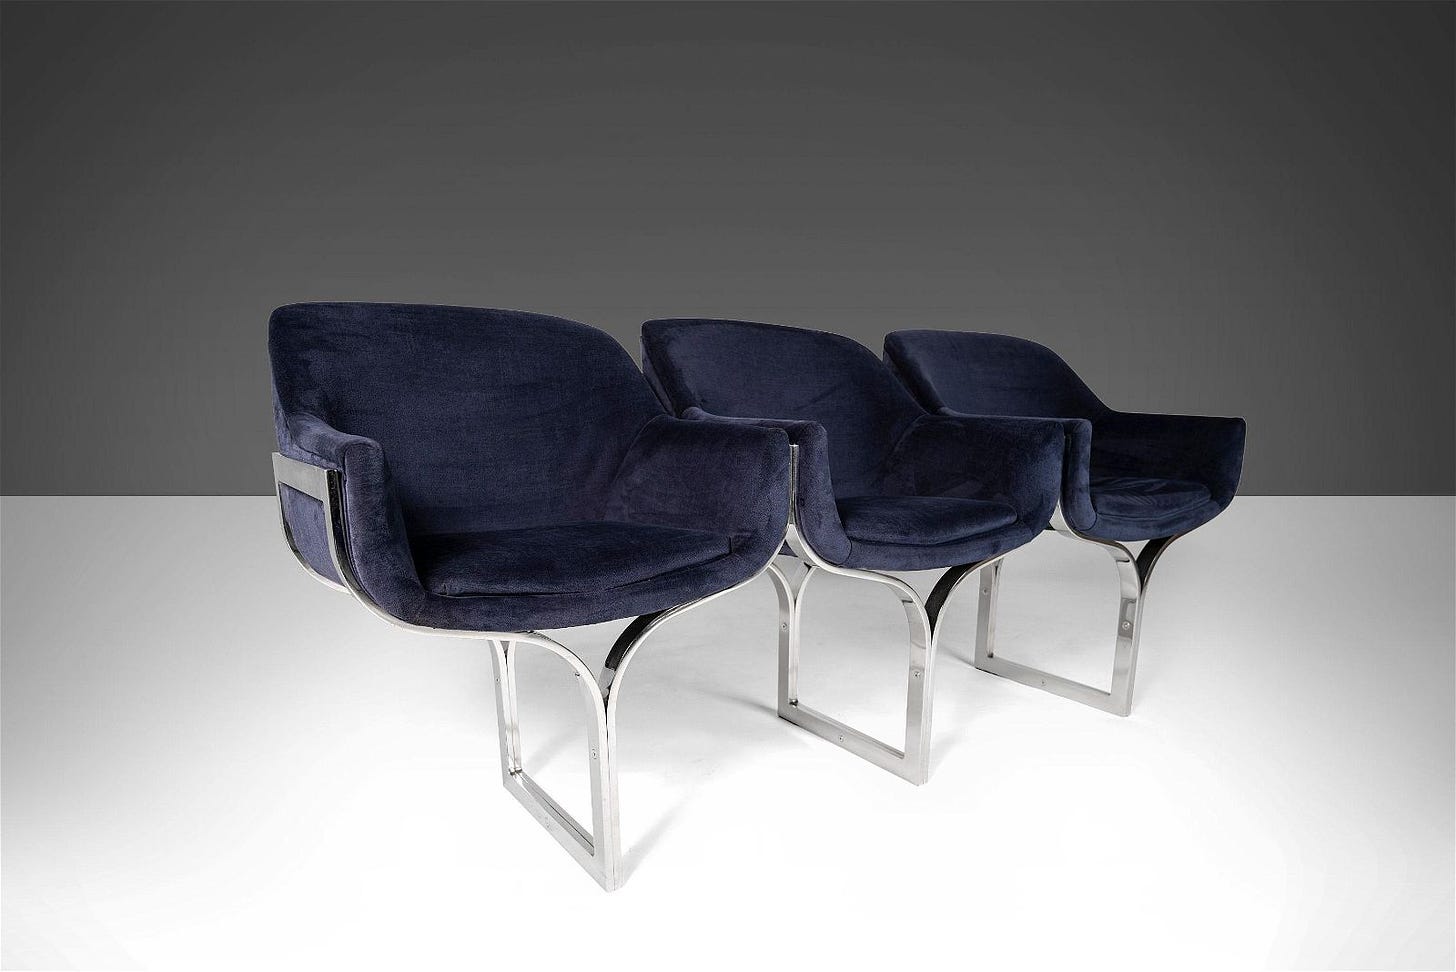 Three (3) Seat Bench / Sofa in Navy Blue Velvet Set on a Chrome Base Attributed to Milo Baughman c.